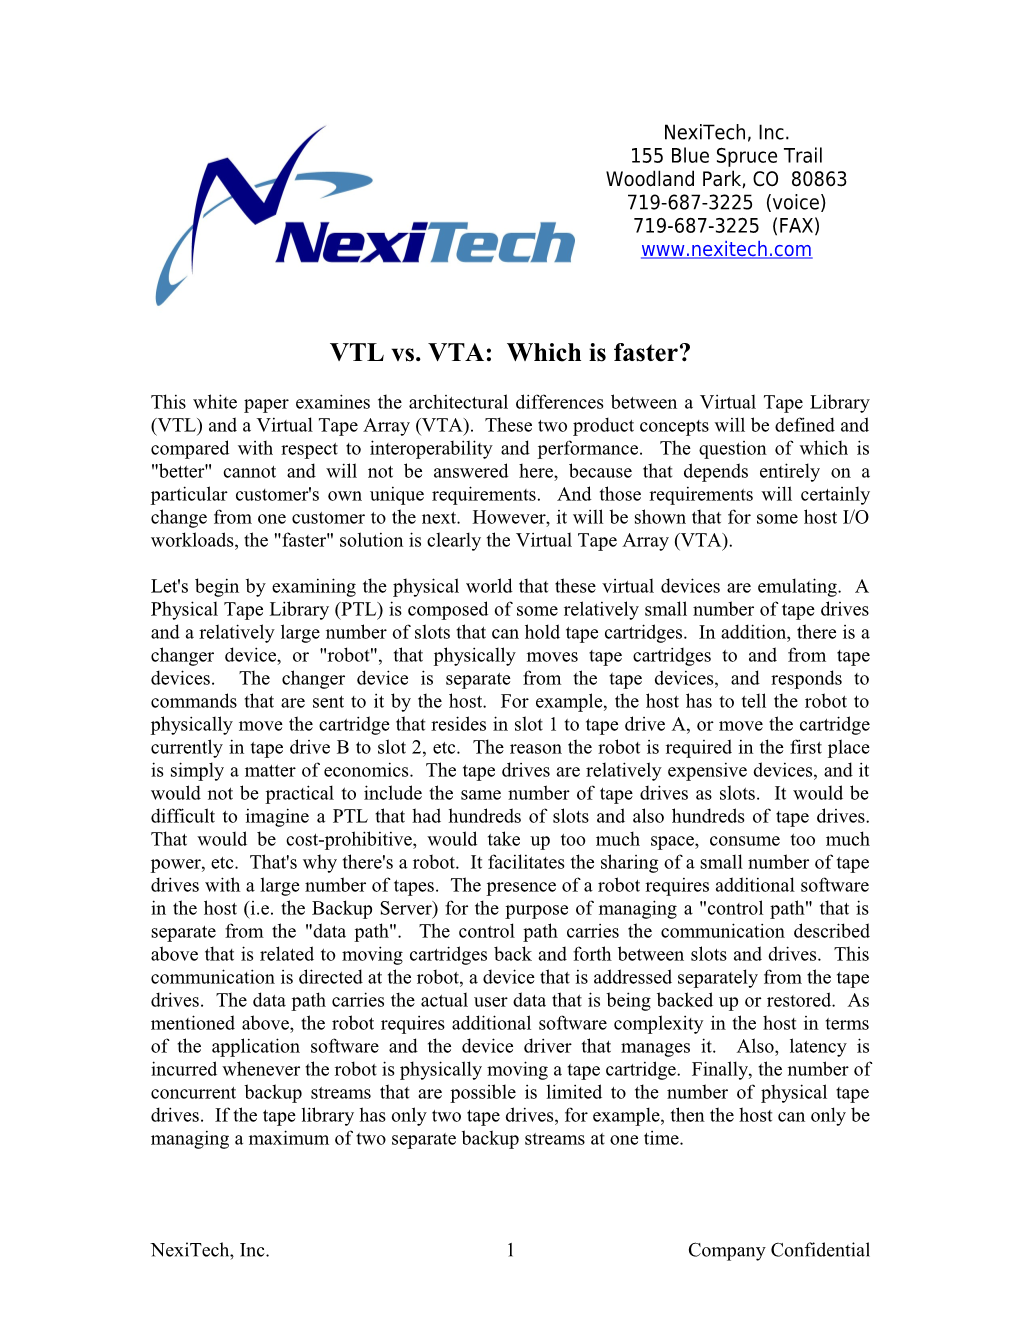 VTL Vs. VTA: Which Is Faster?